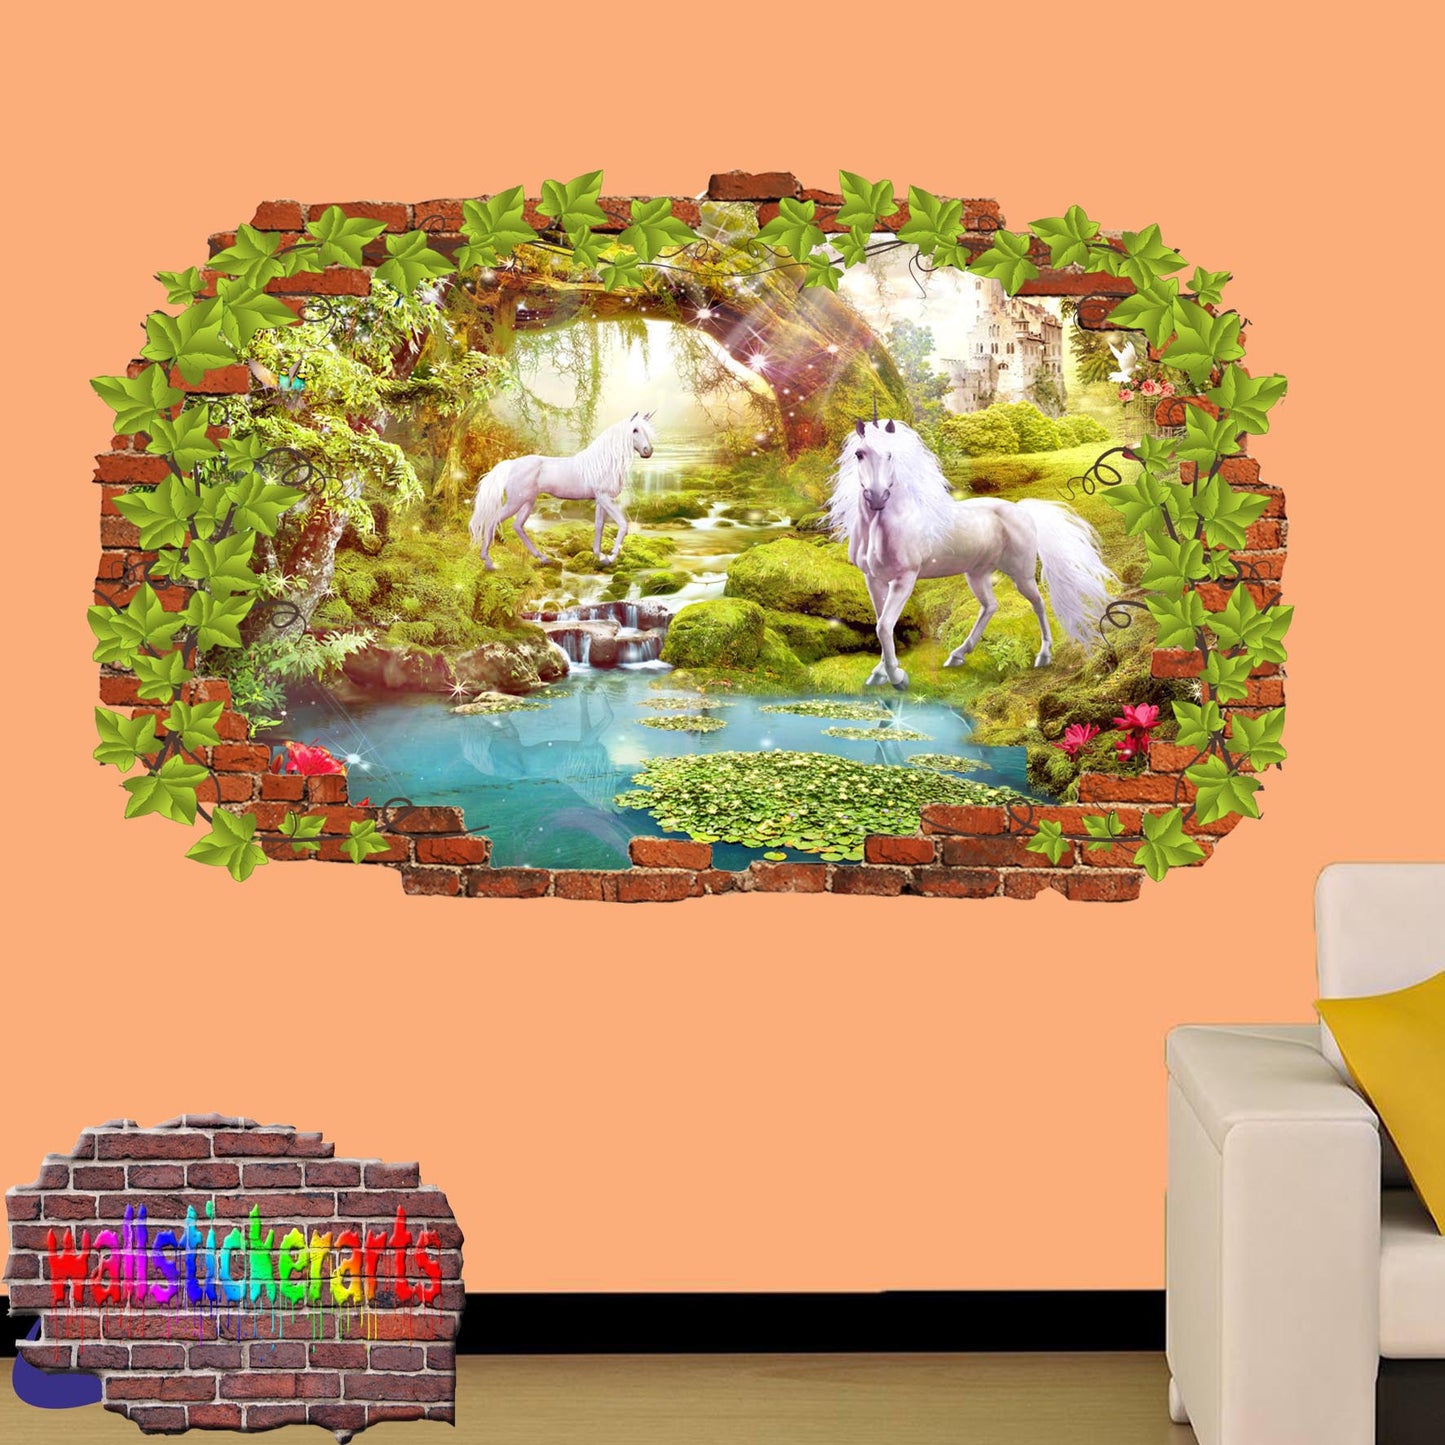 Unicorns Dreamland Forest 3d Ivy Wall Sticker Girls Room Decoration Decal Mural